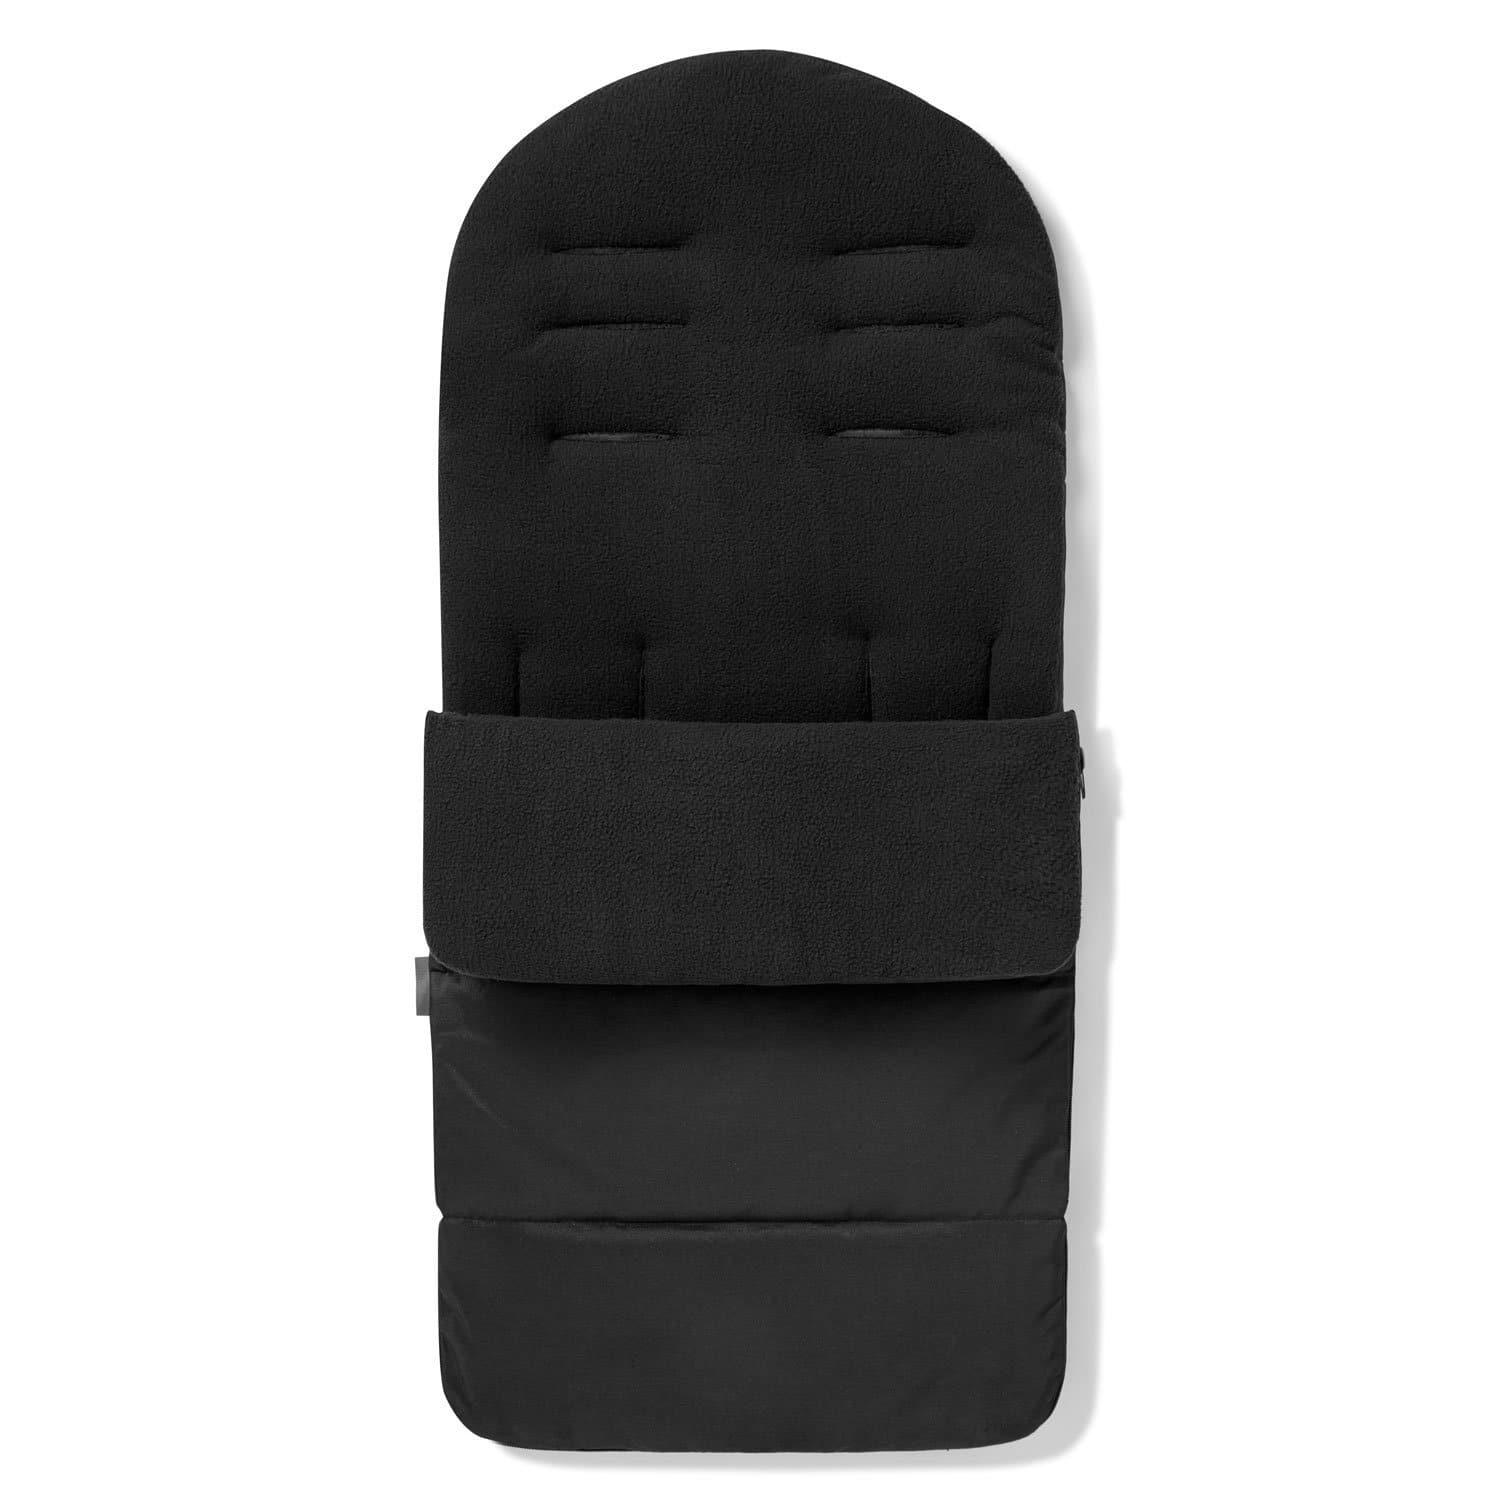 Premium Footmuff / Cosy Toes Compatible with Cybex - Black Jack / Fits All Models | For Your Little One